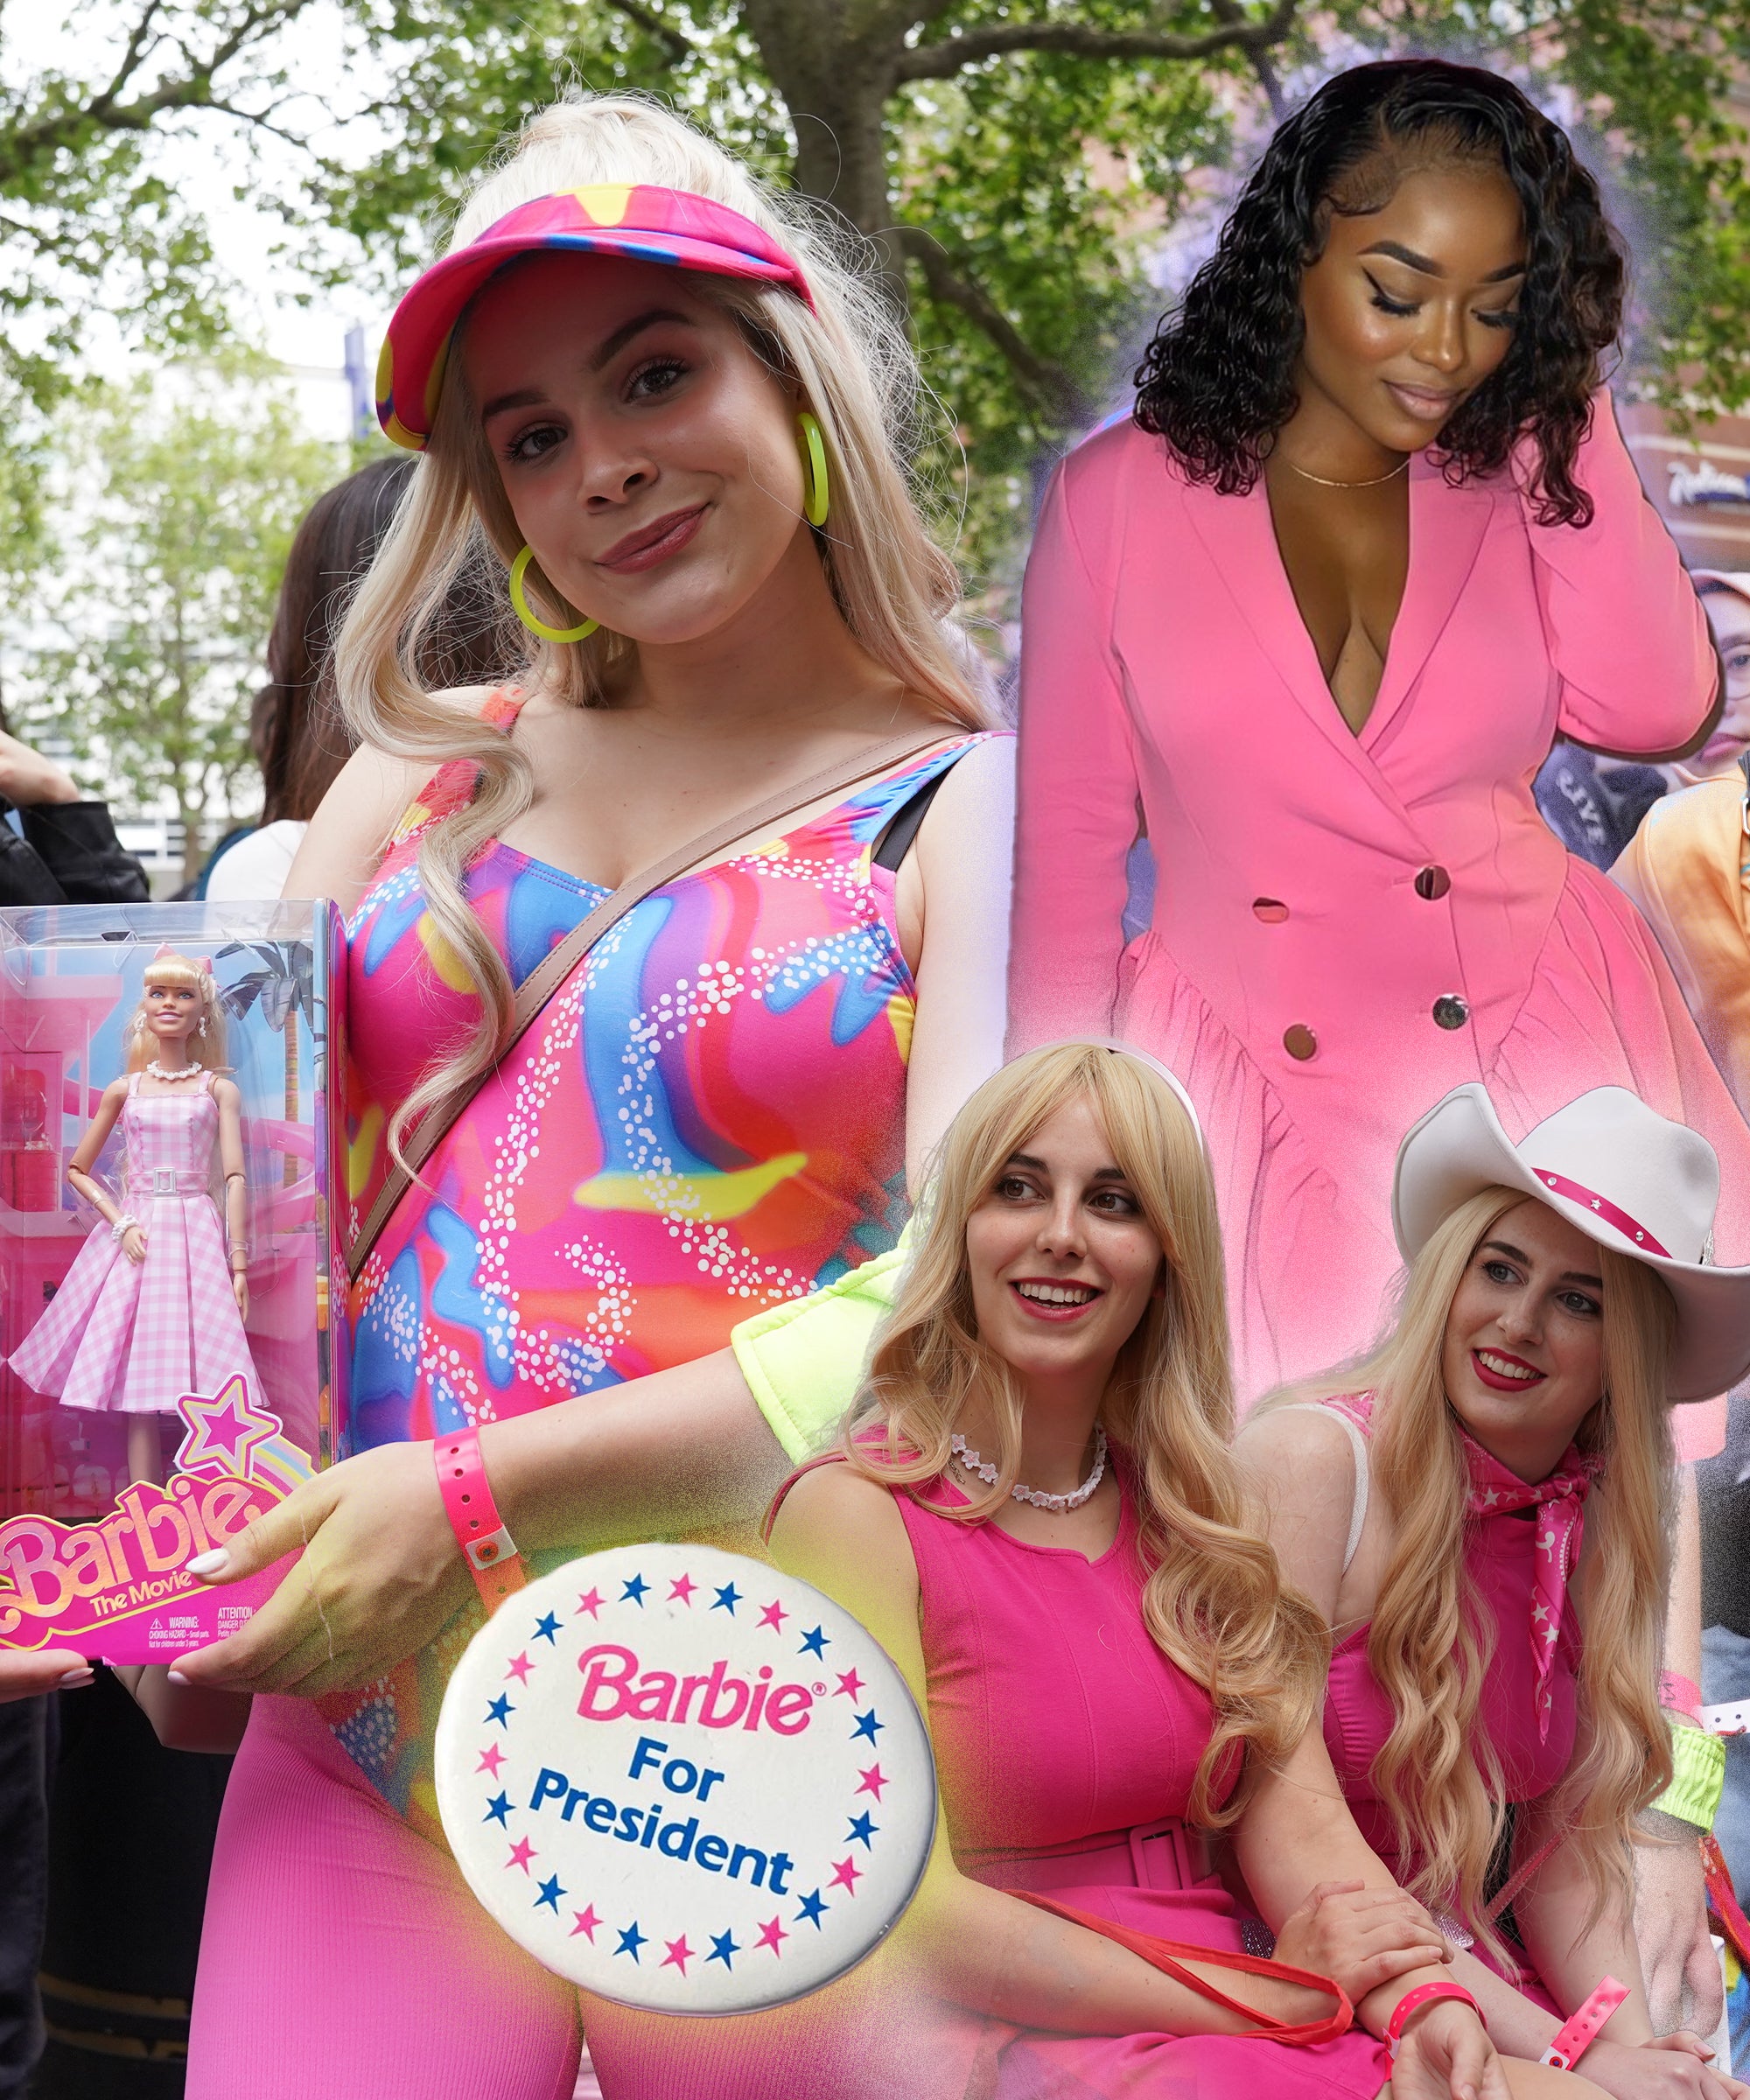 Every Must-See Fashion Moment From the Barbie Press Tour